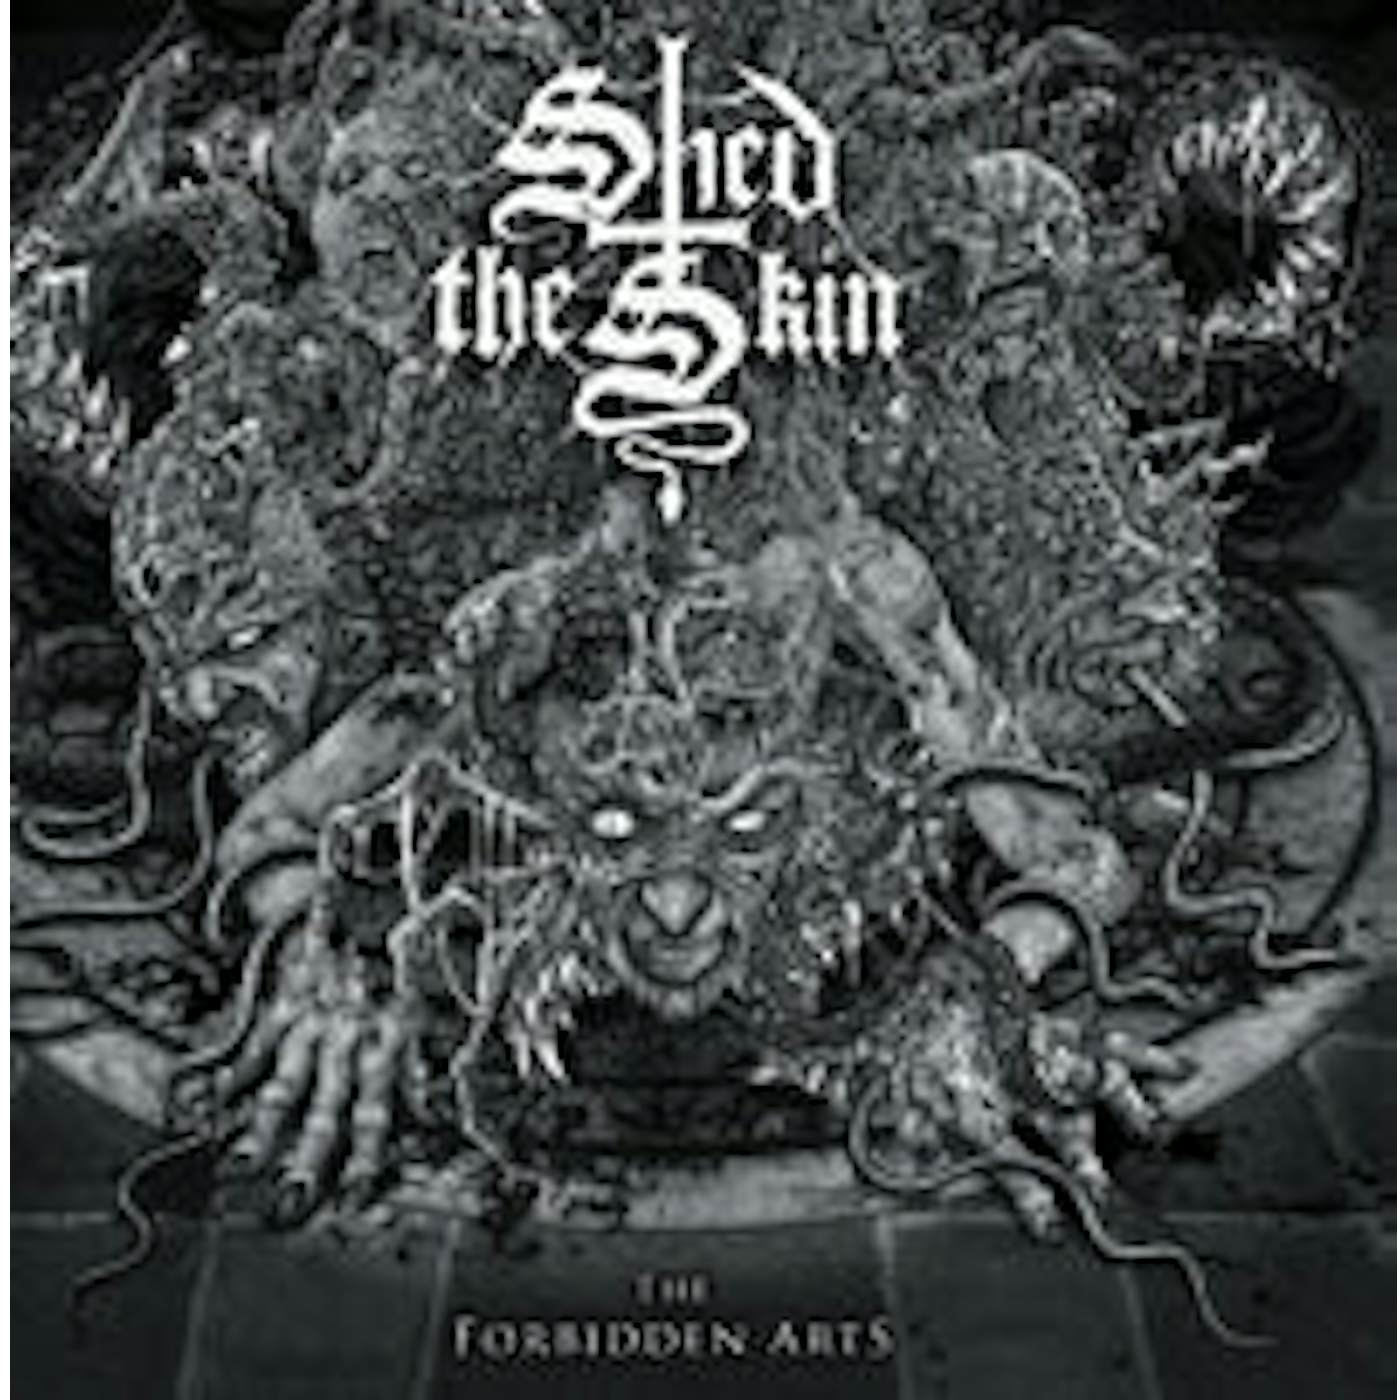 Shed The Skin LP - The Forbidden Arts (Vinyl)